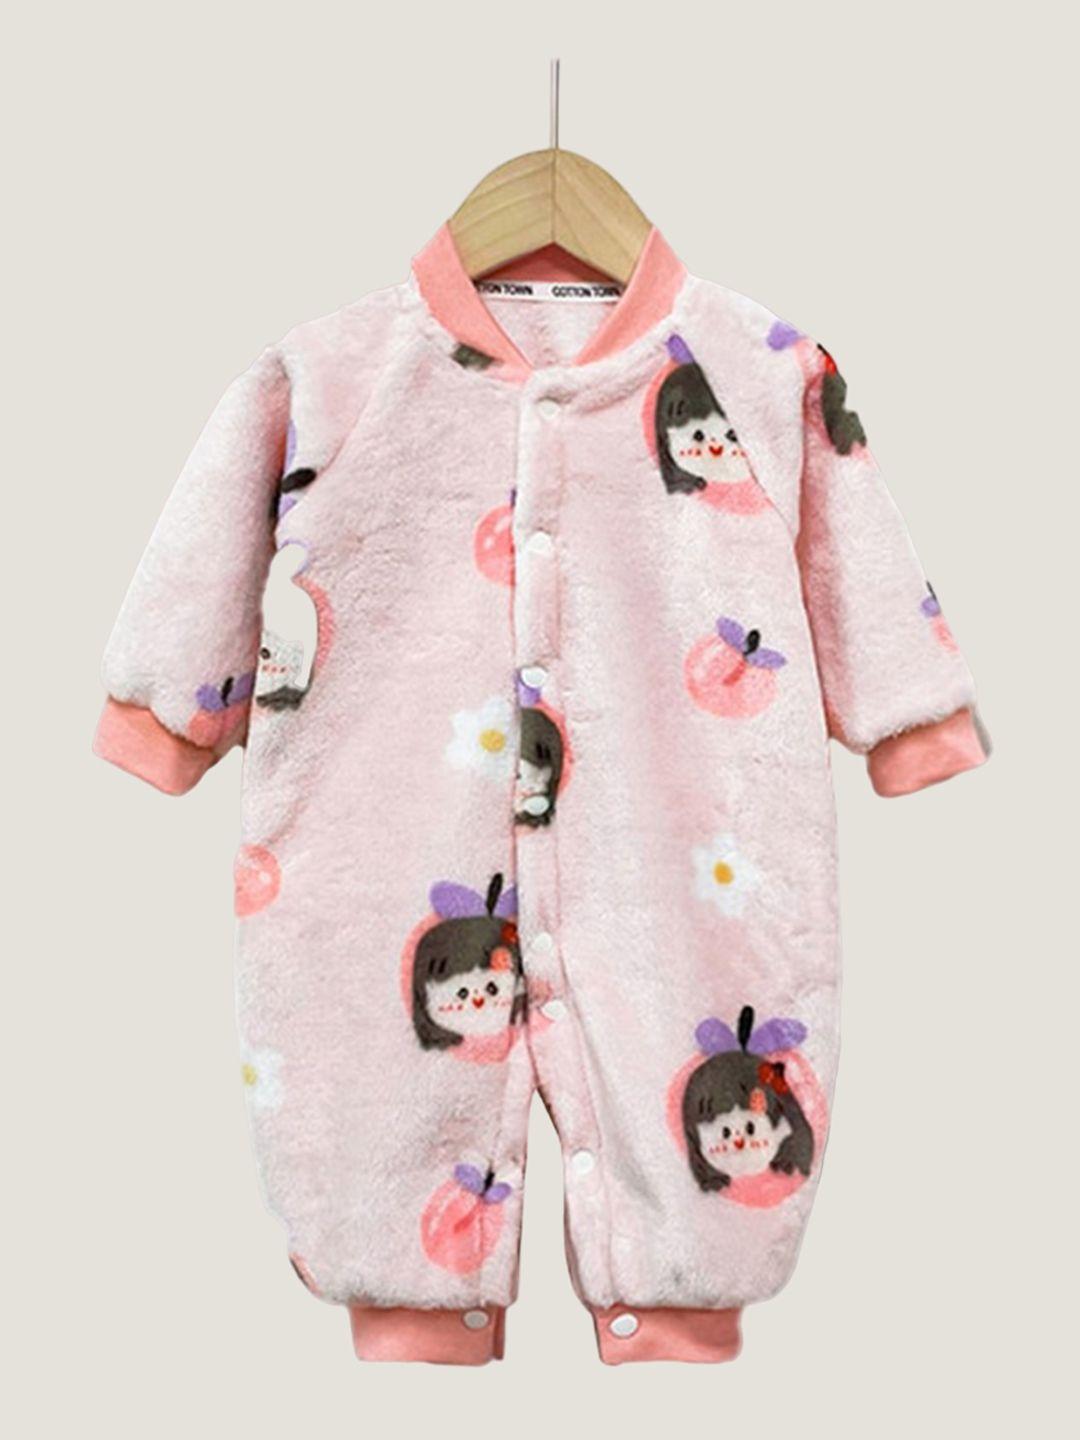 stylecast-infant-girls-printed-rompers